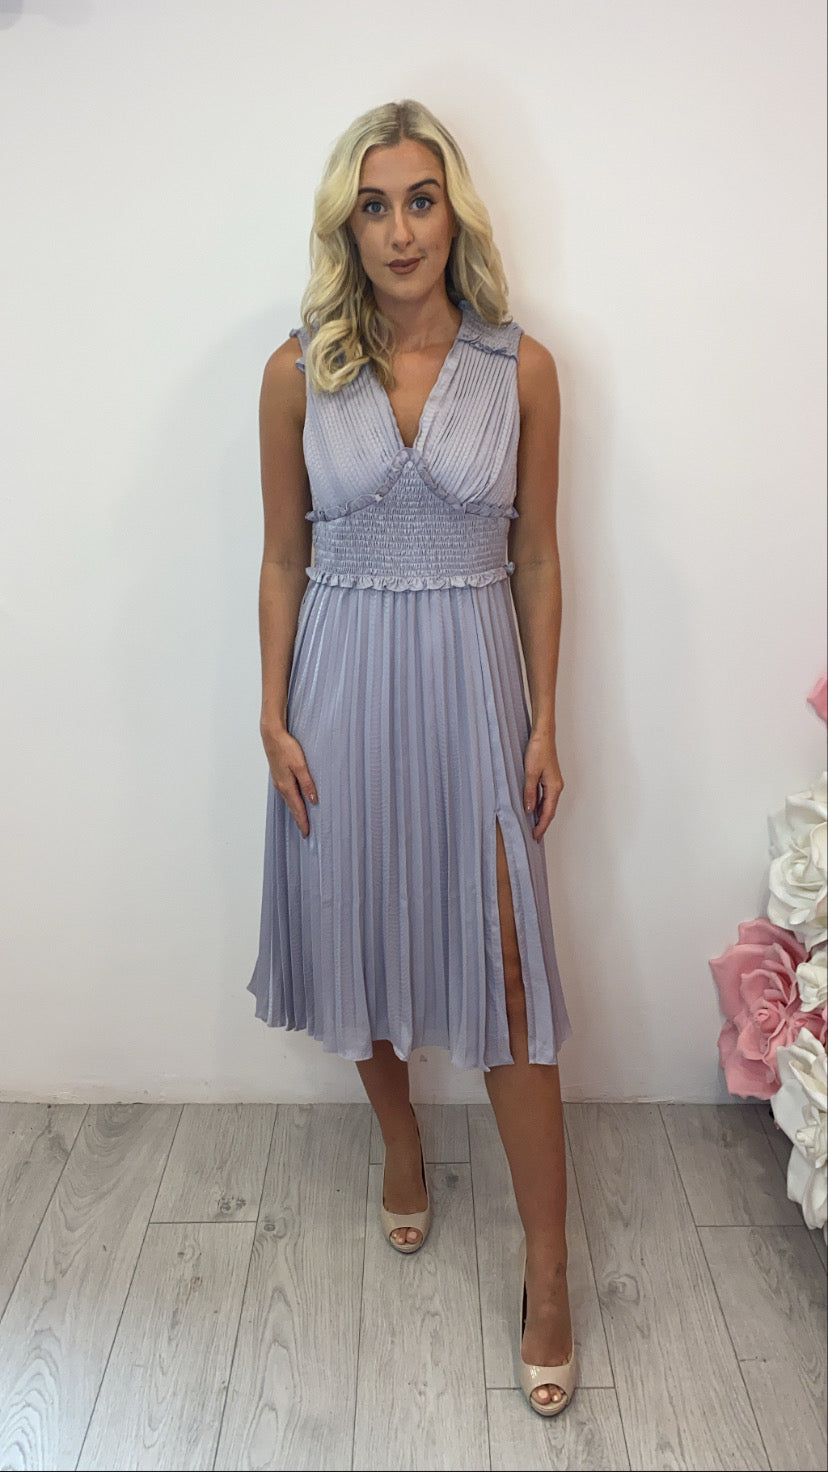 Lilac Grey Plunge Front Pleated Midi Dress